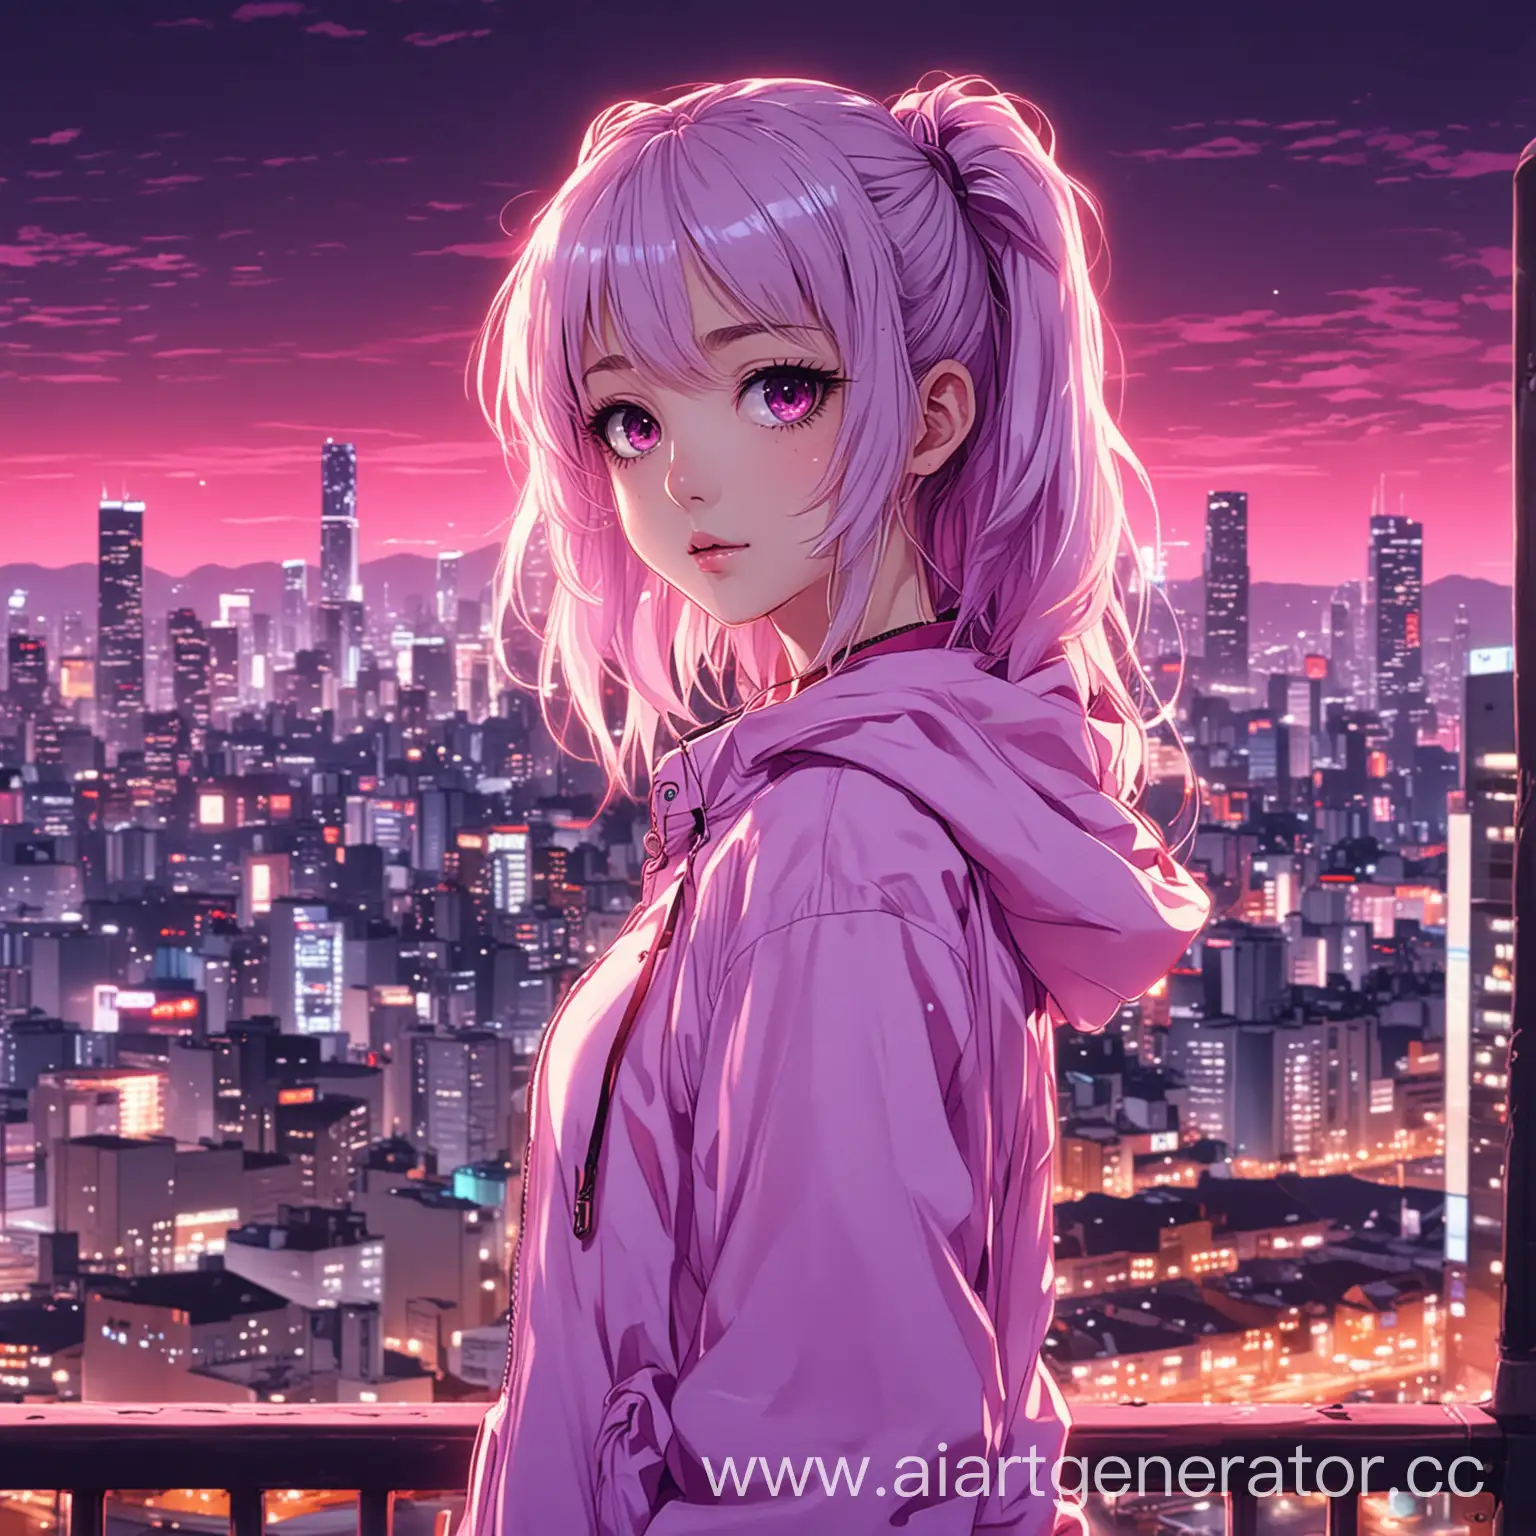 Stylish-Anime-Girl-with-Neon-Cityscape-Background-in-Pink-and-Purple